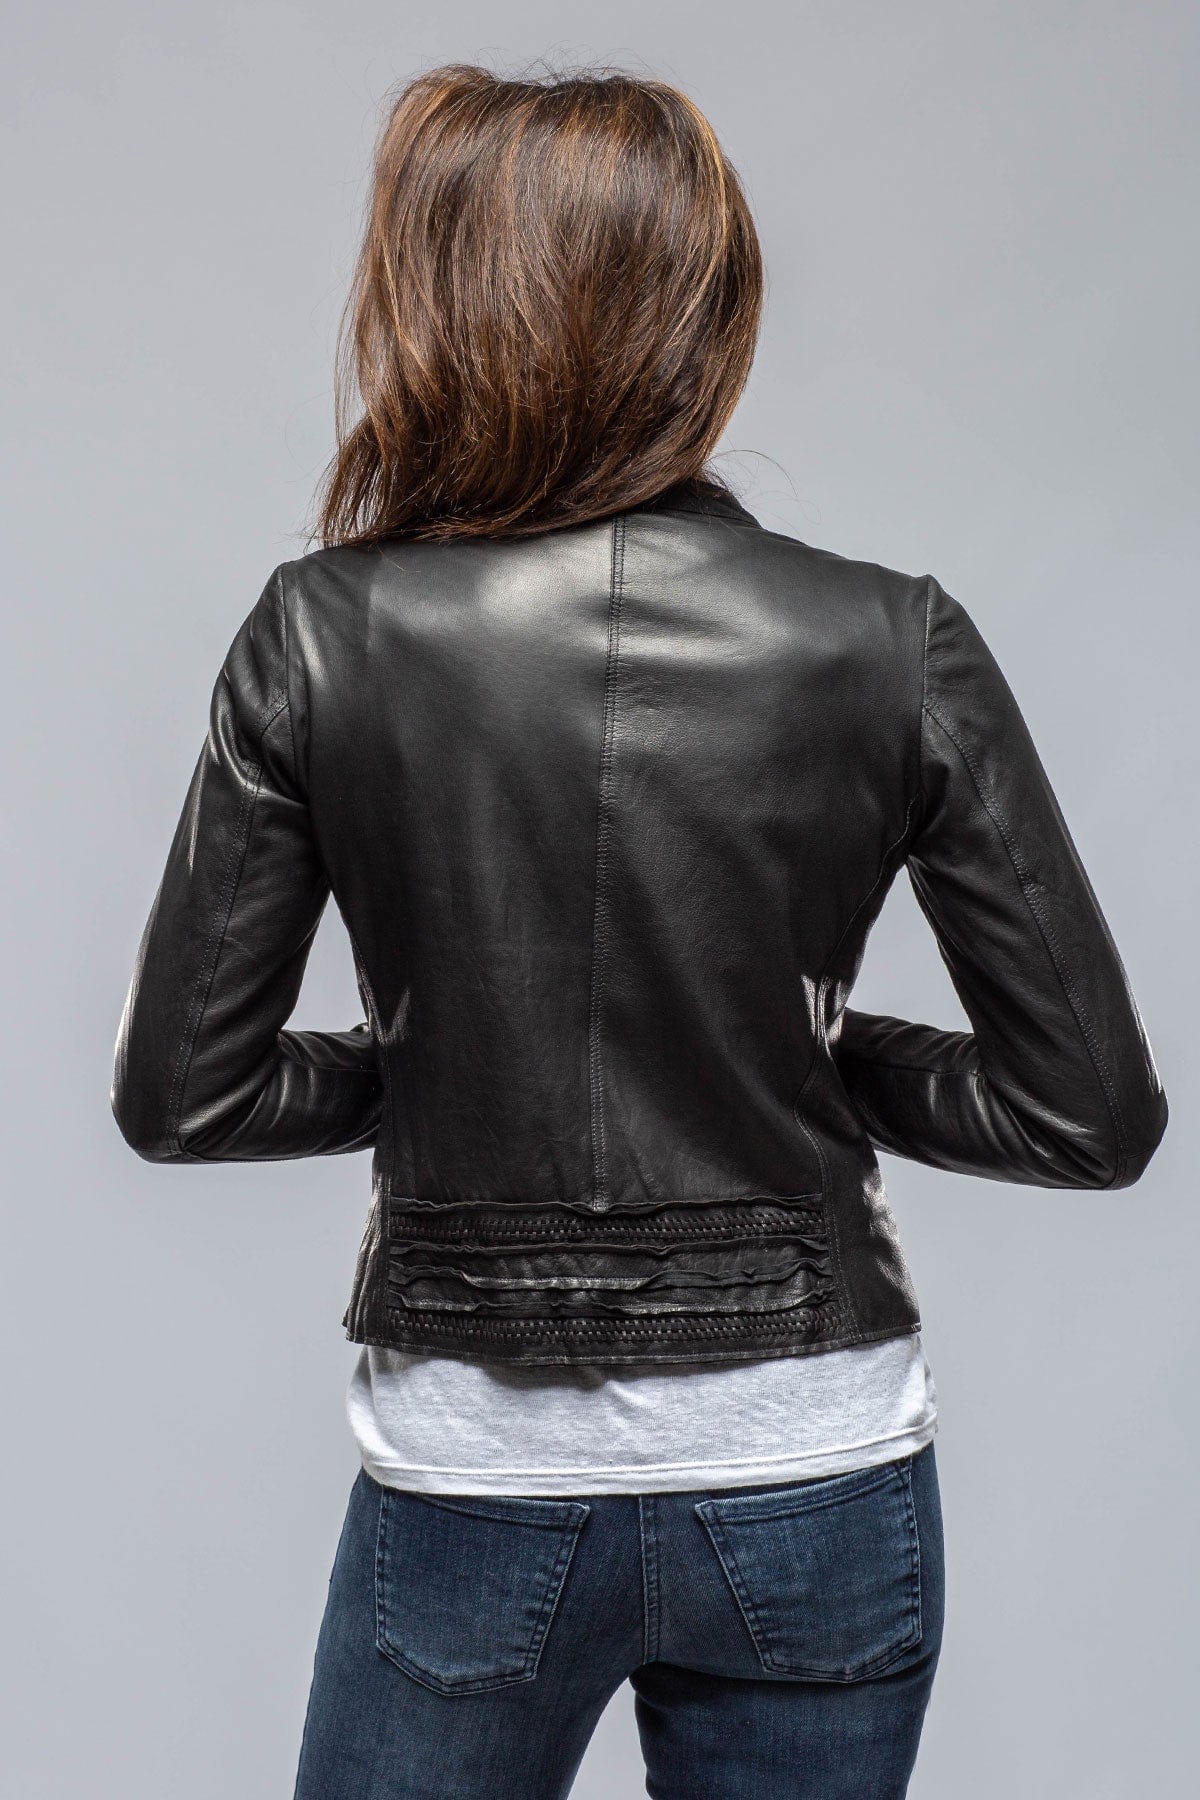 Becca Leather Jacket - AXEL'S